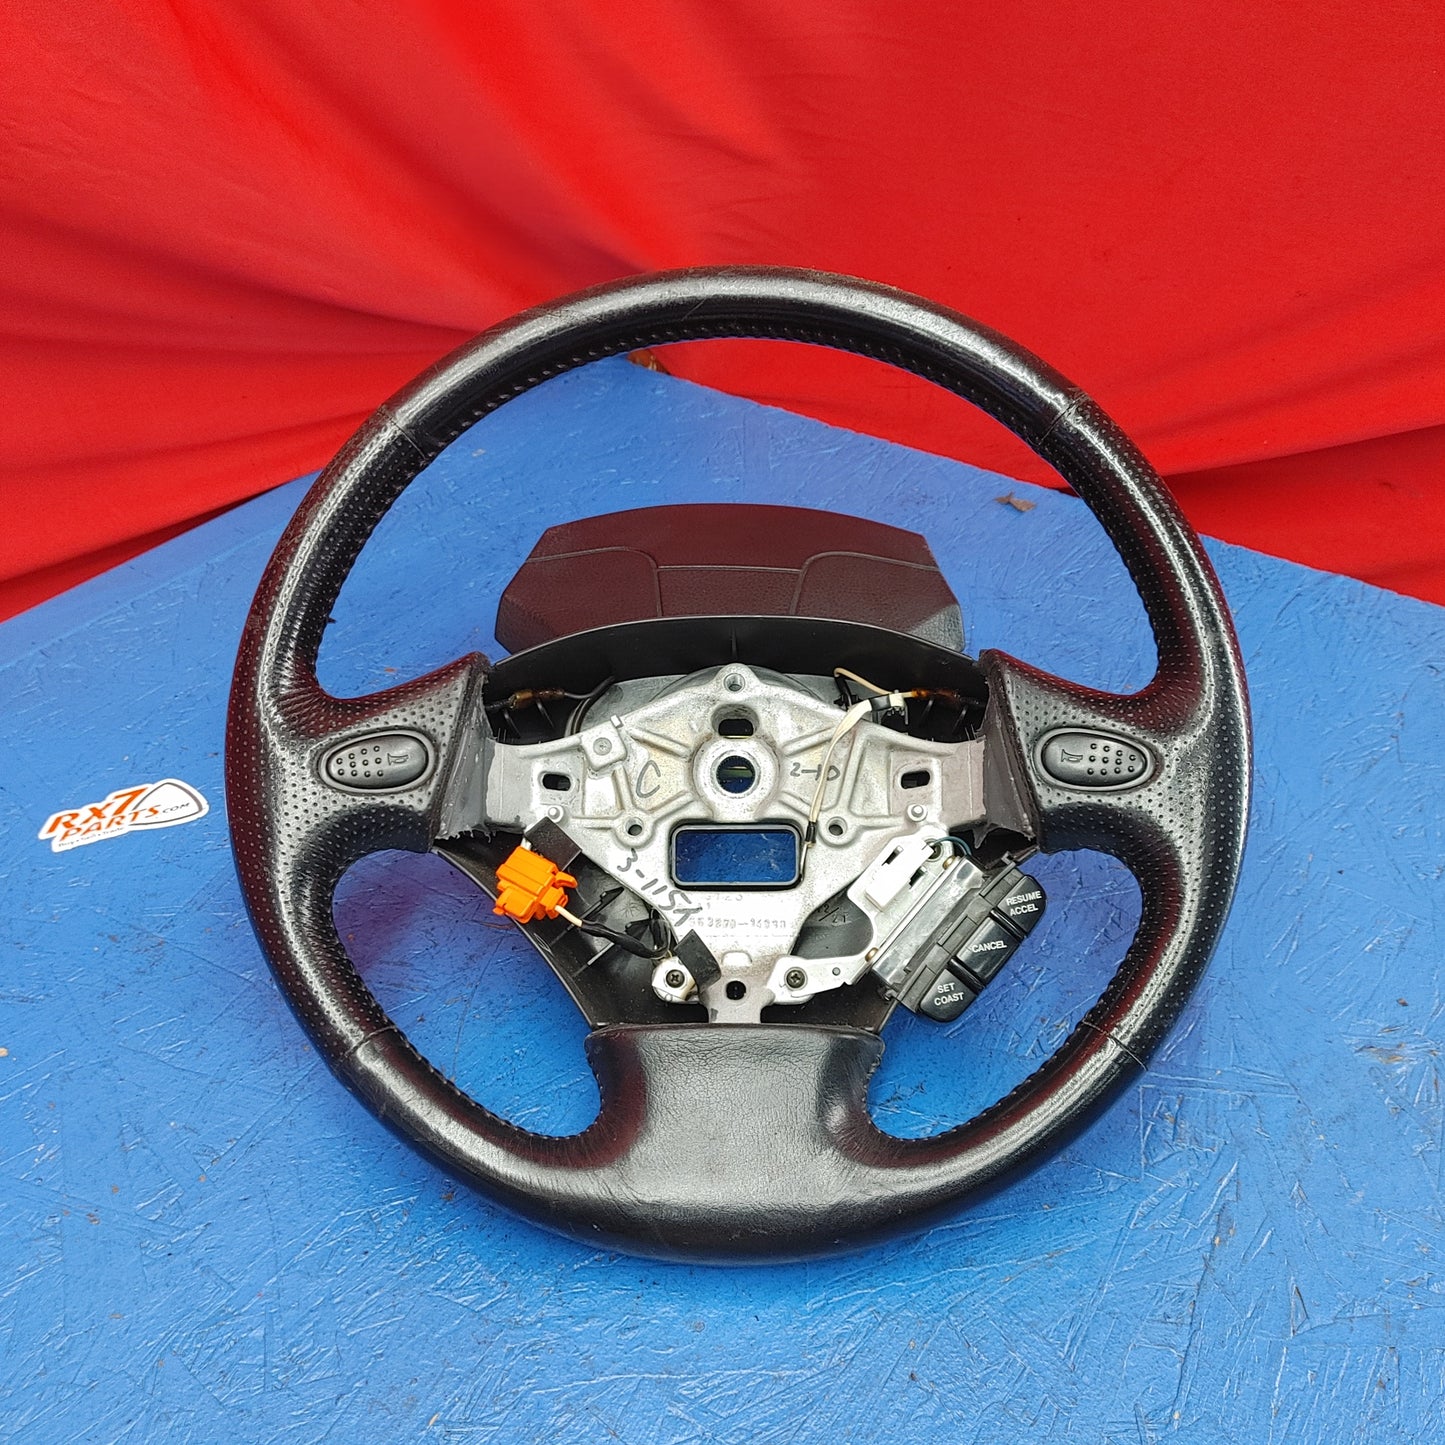 LHD Steering Wheel Complete w/ Cruise Control Buttons  RX7 FD FD3S 93 - 95 Mazda S7B25/4